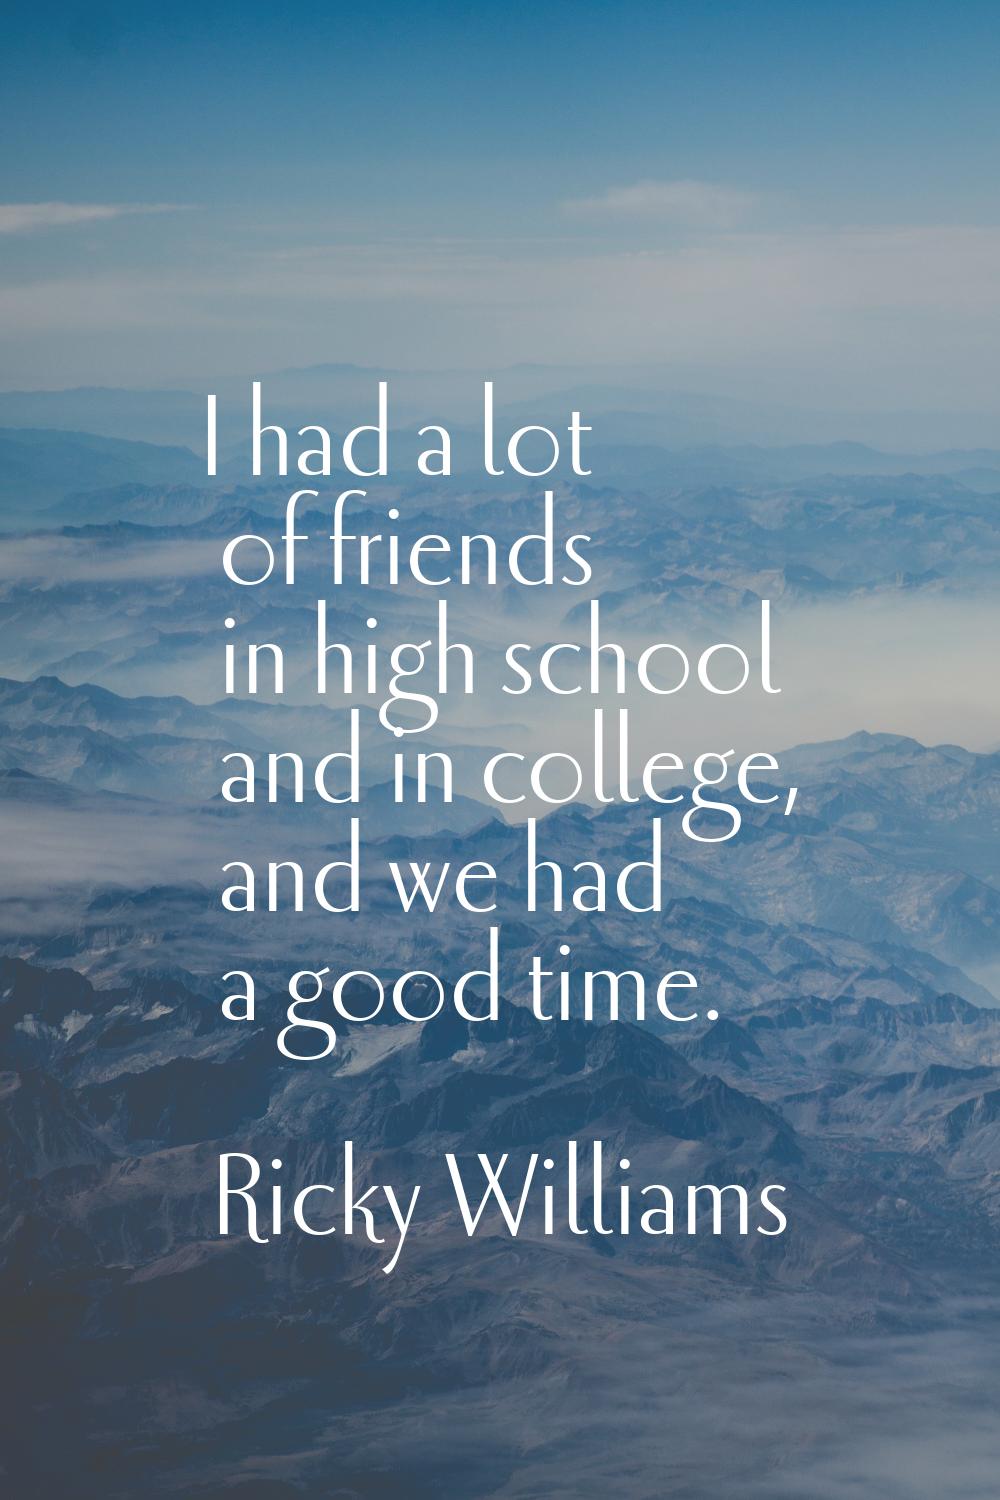 I had a lot of friends in high school and in college, and we had a good time.